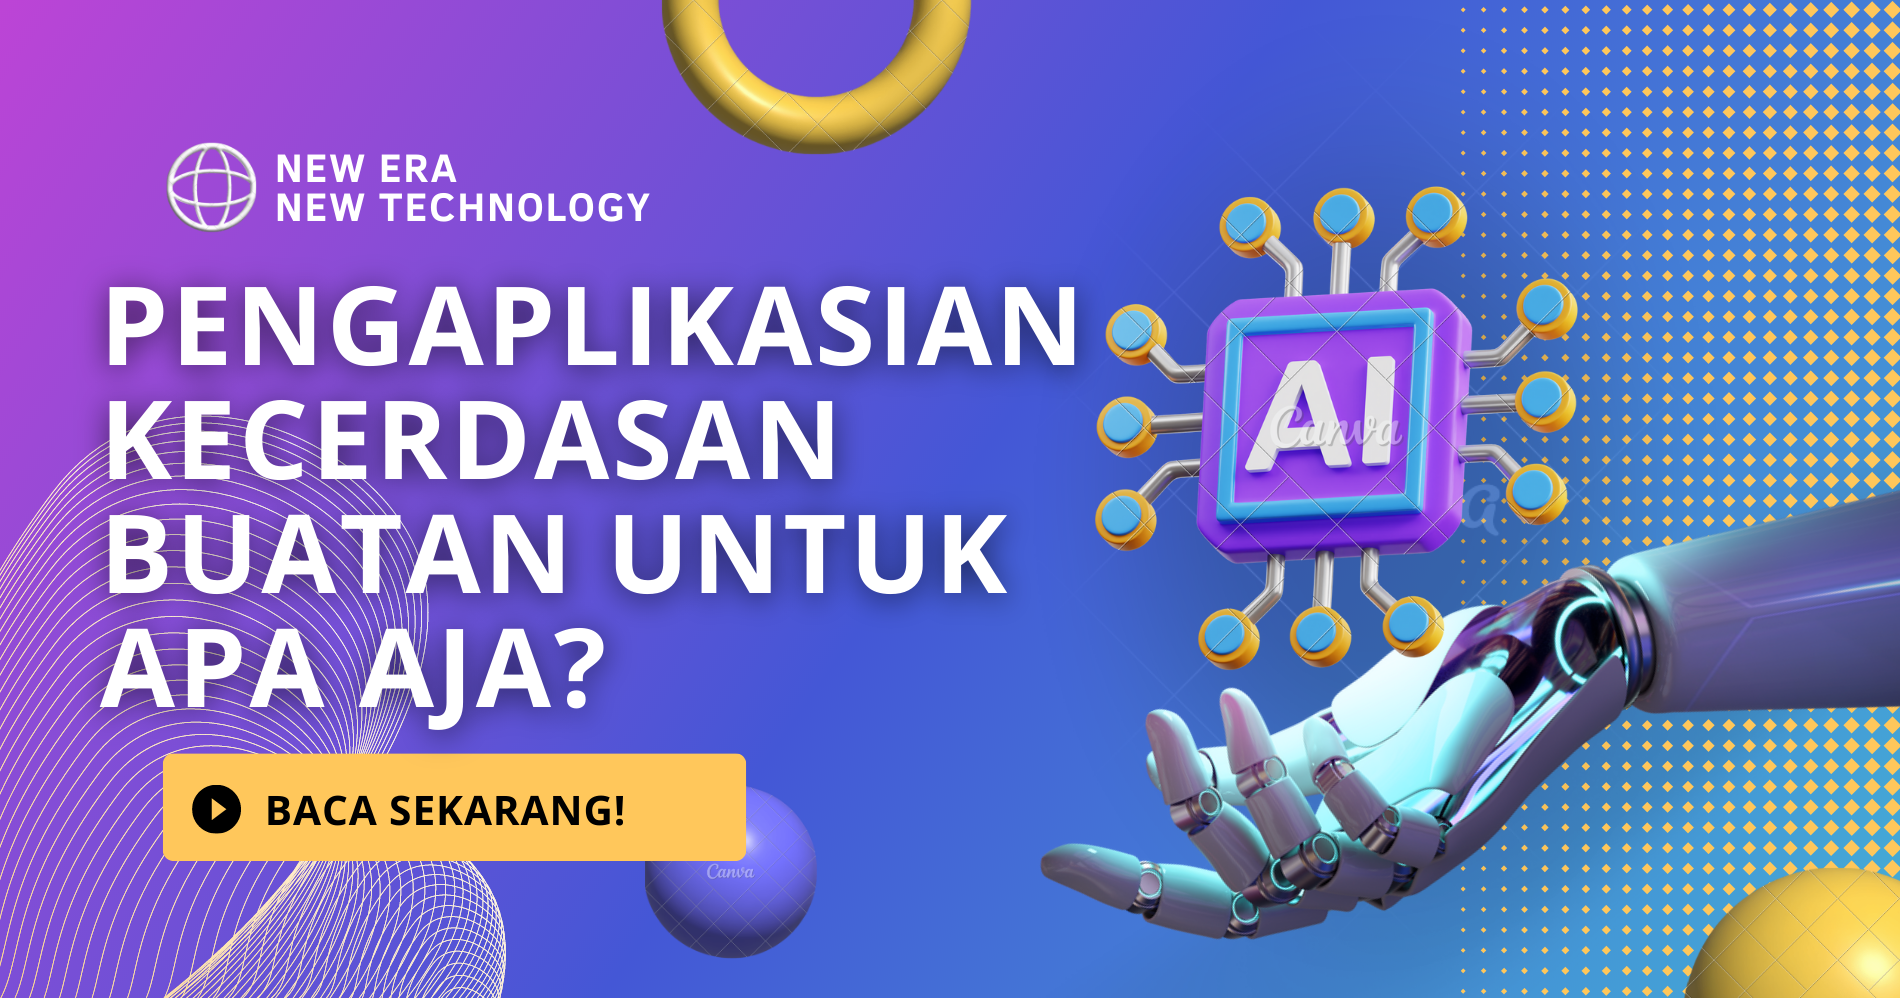 Artificial Intelligence (edited by canva)